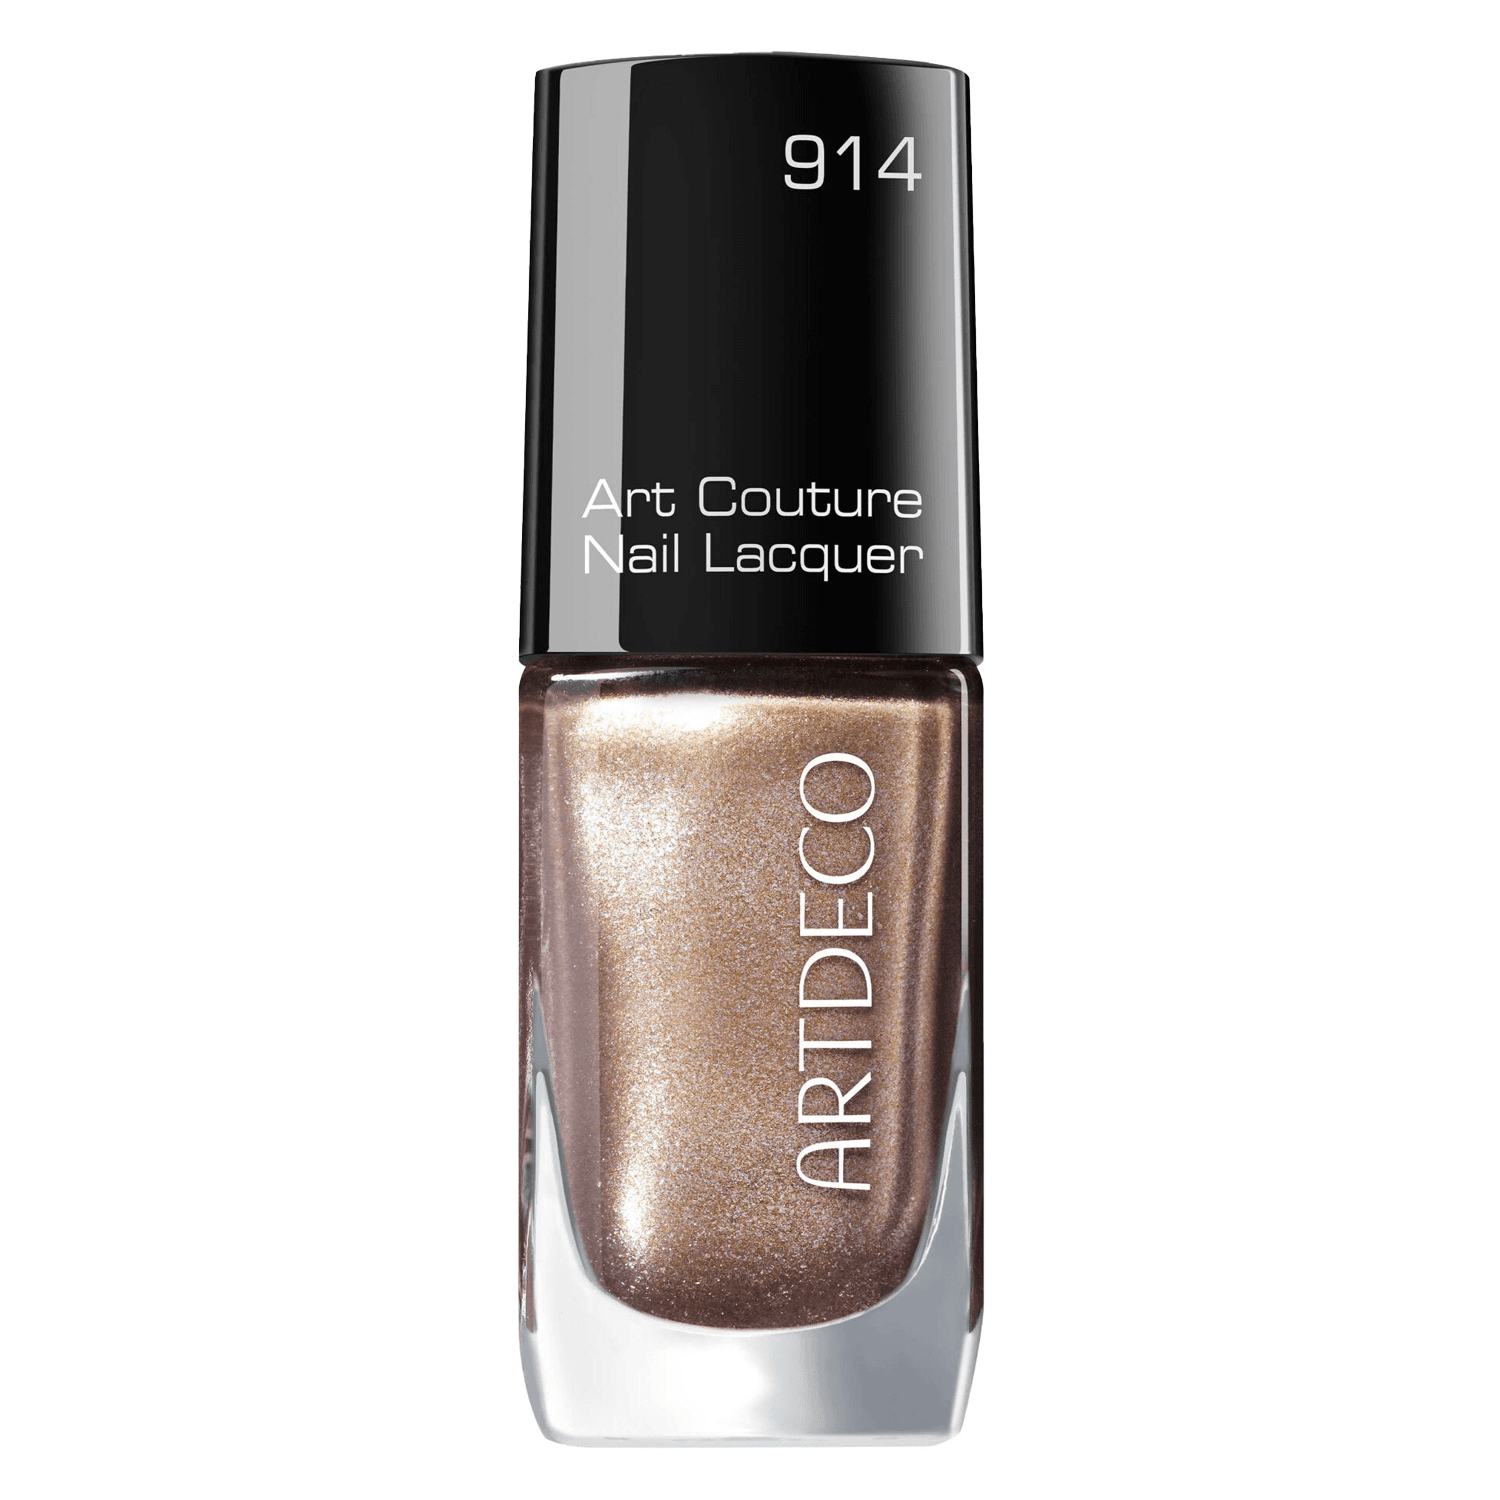 Art Couture - Nail Lacquer Golden Nights 914